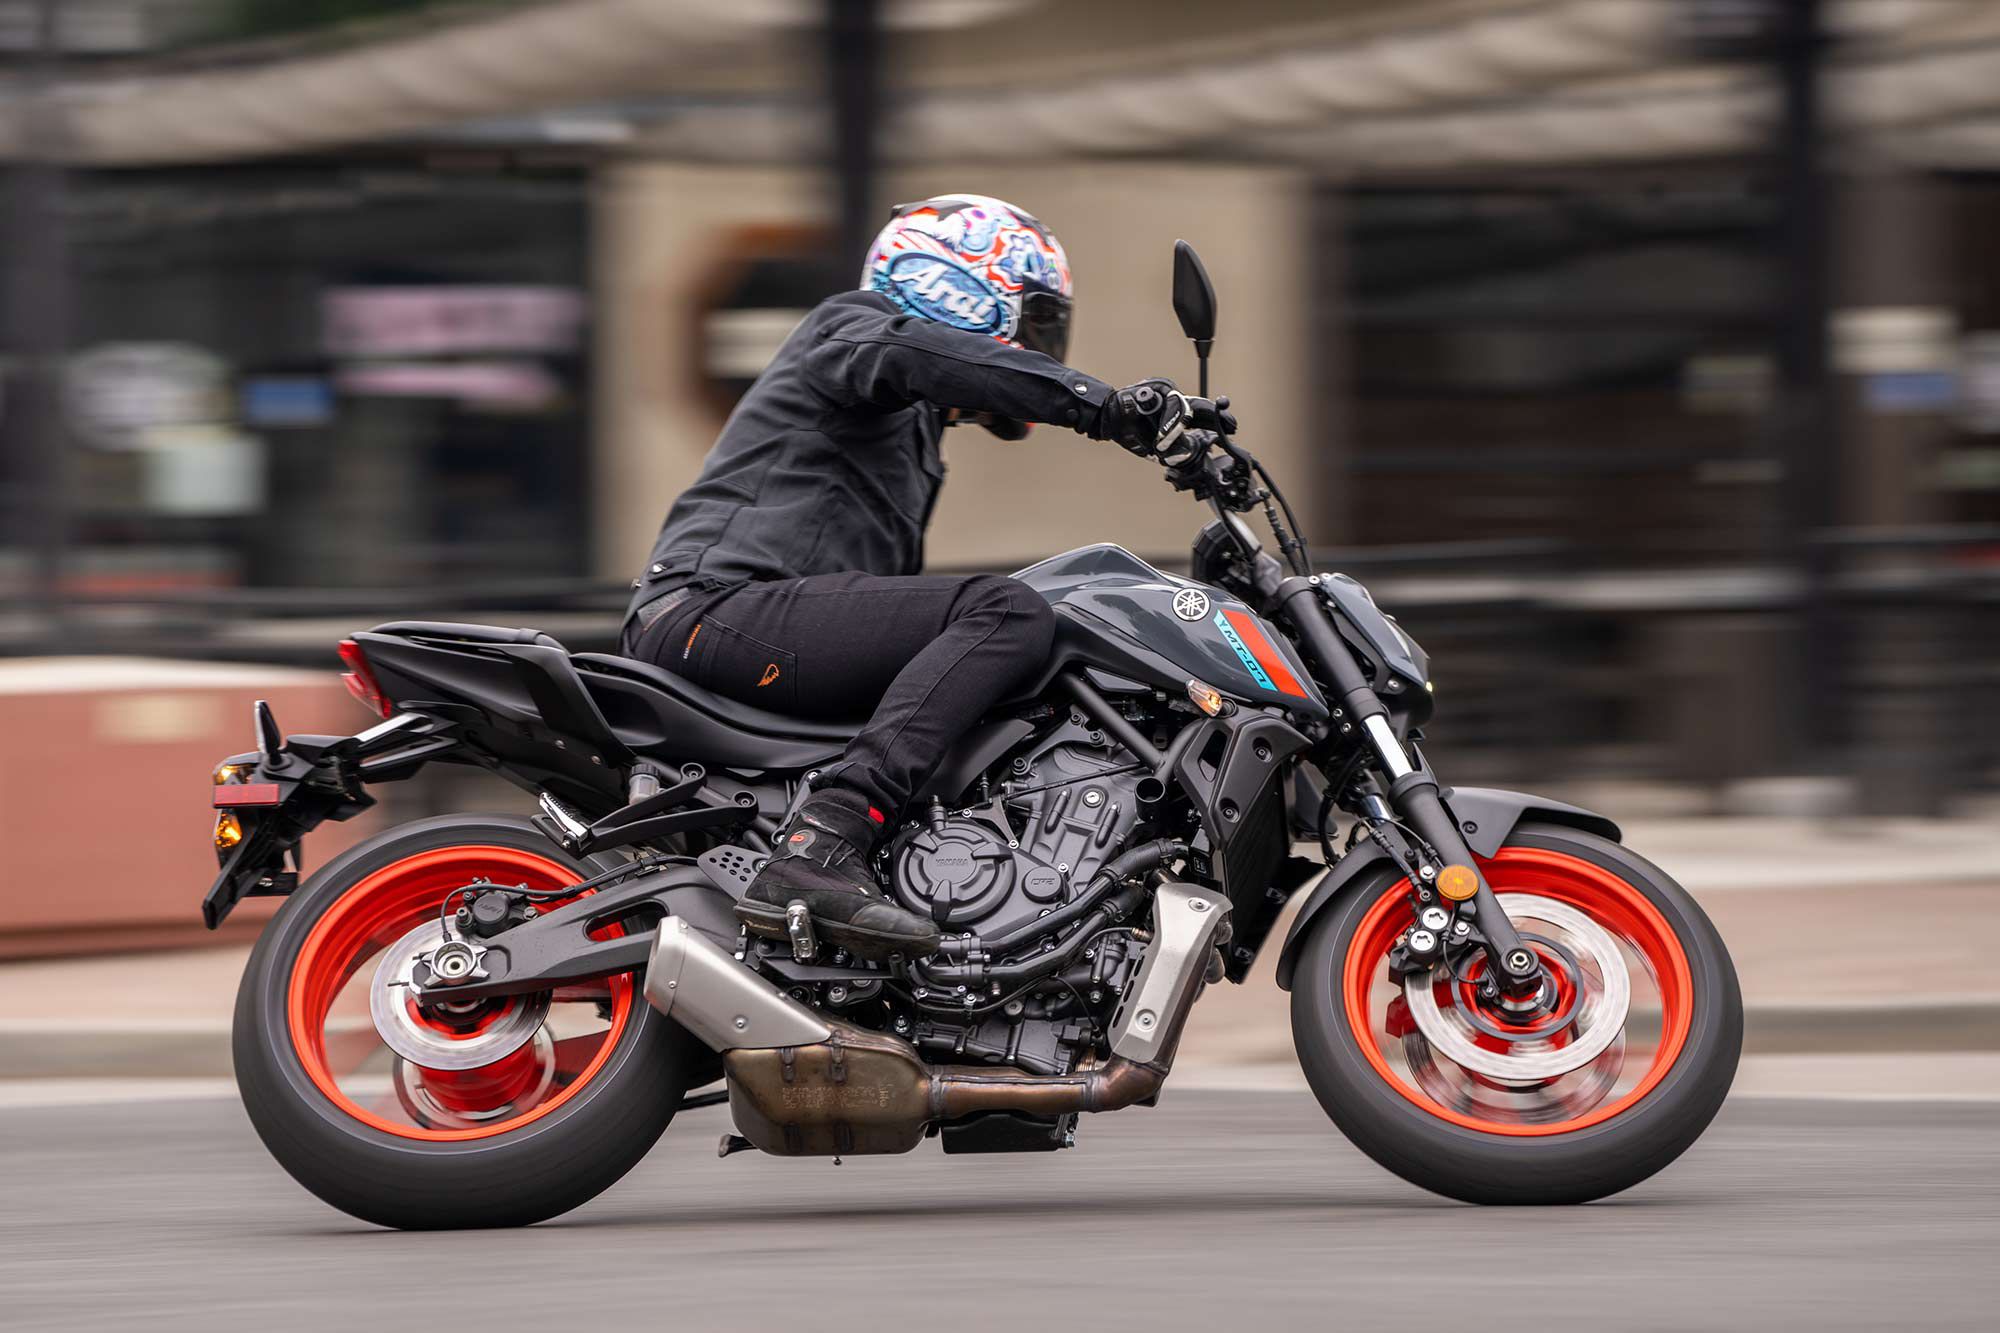 Yamaha’s MT-07 naked bike is a hoot to ride around town. It’s a versatile little street bike that offers good value for its $7,699 asking price.